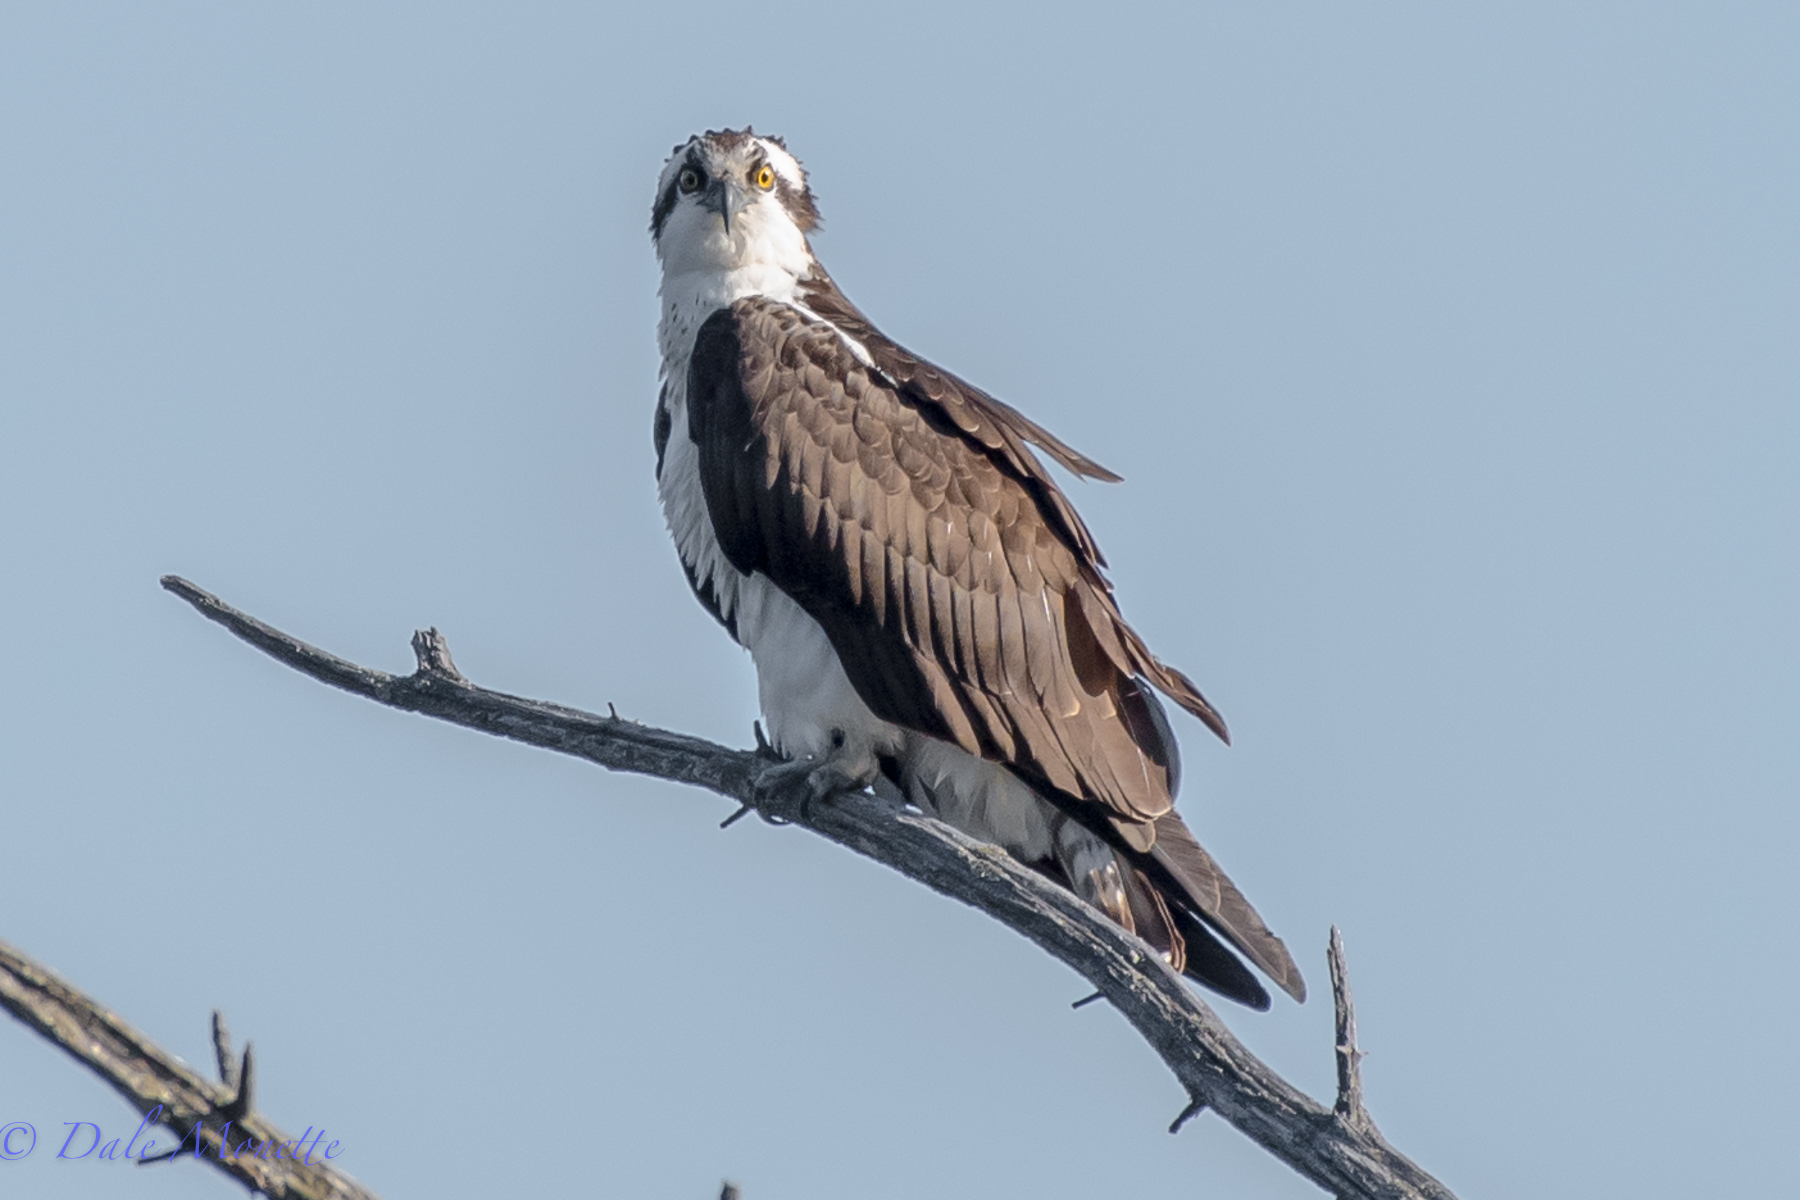   This osprey has been hanging around the beaver pond for a week now. &nbsp;This is todays picture &nbsp;(4/13/16). &nbsp;I suspect to see him gone on his way north any day now. &nbsp;Check out those wild eyes.... &nbsp;  